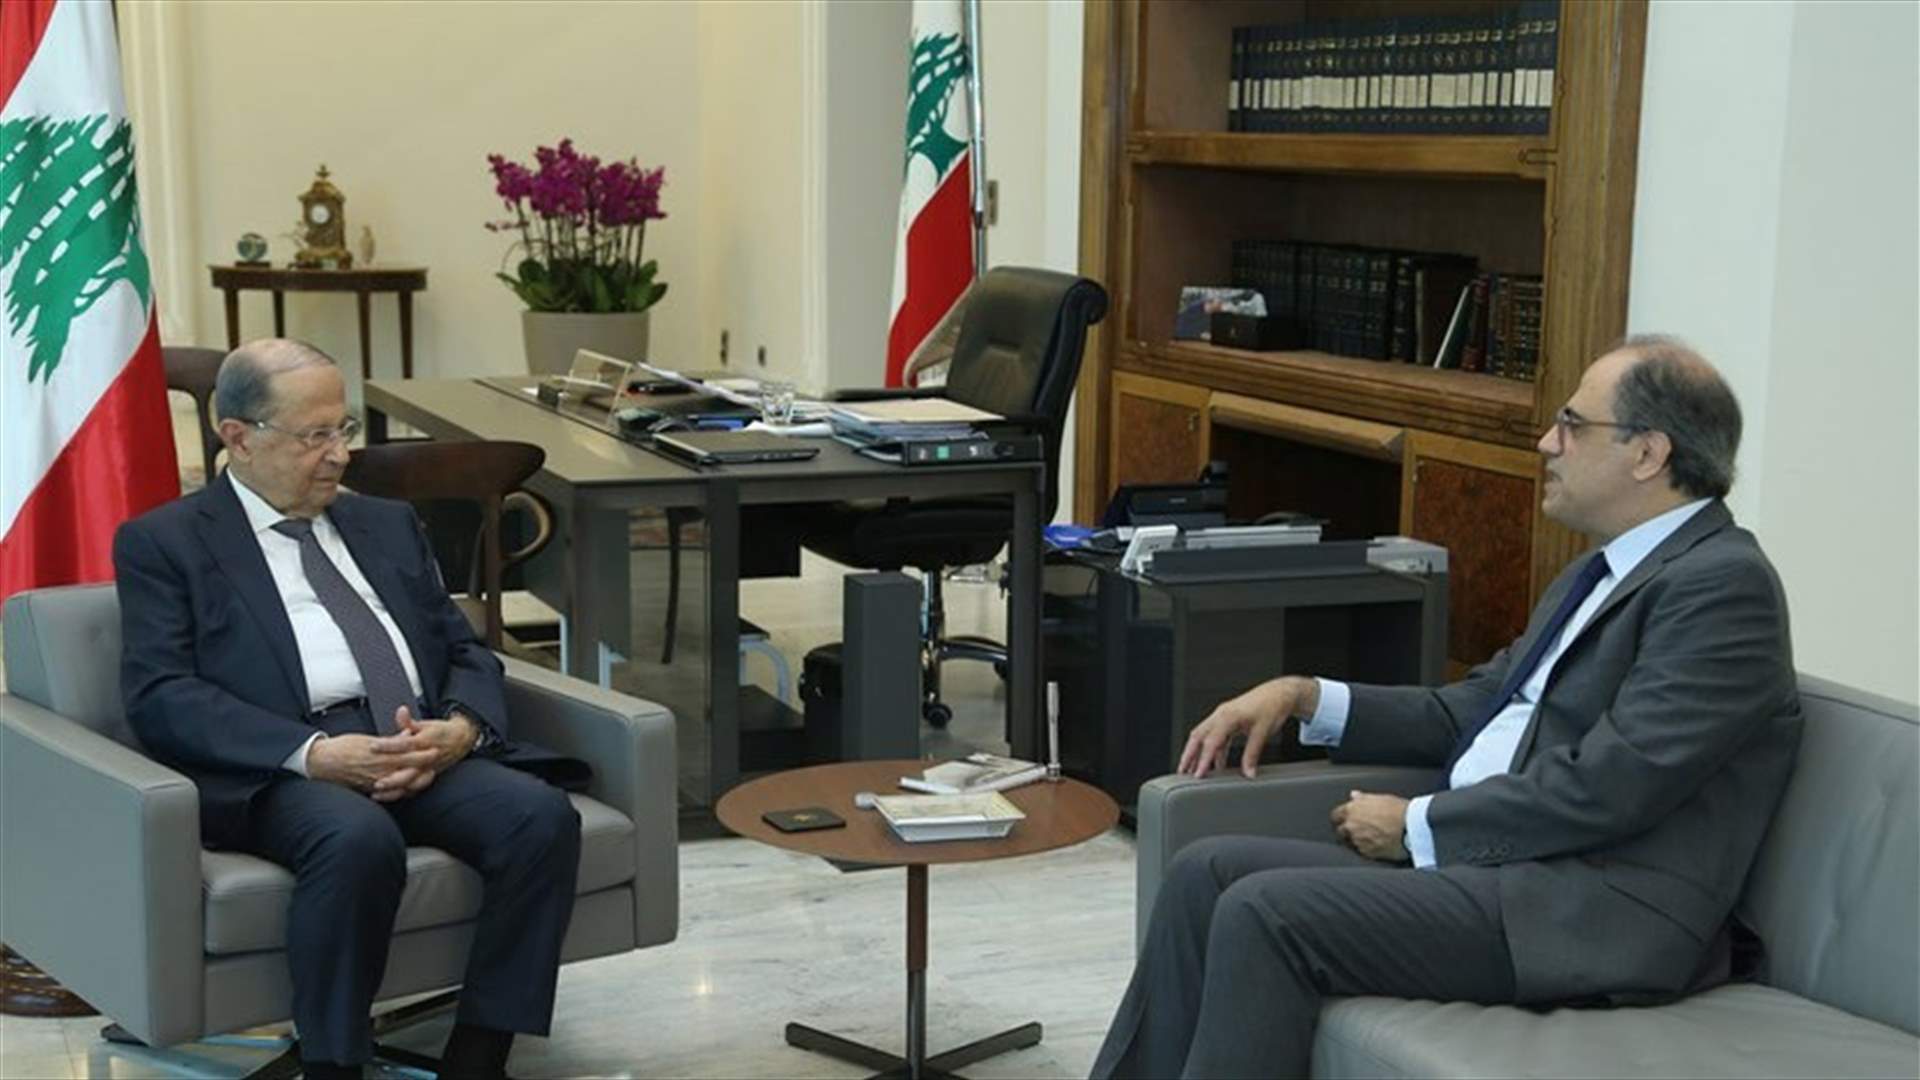 President Aoun meets with IMF official Jihad Azour